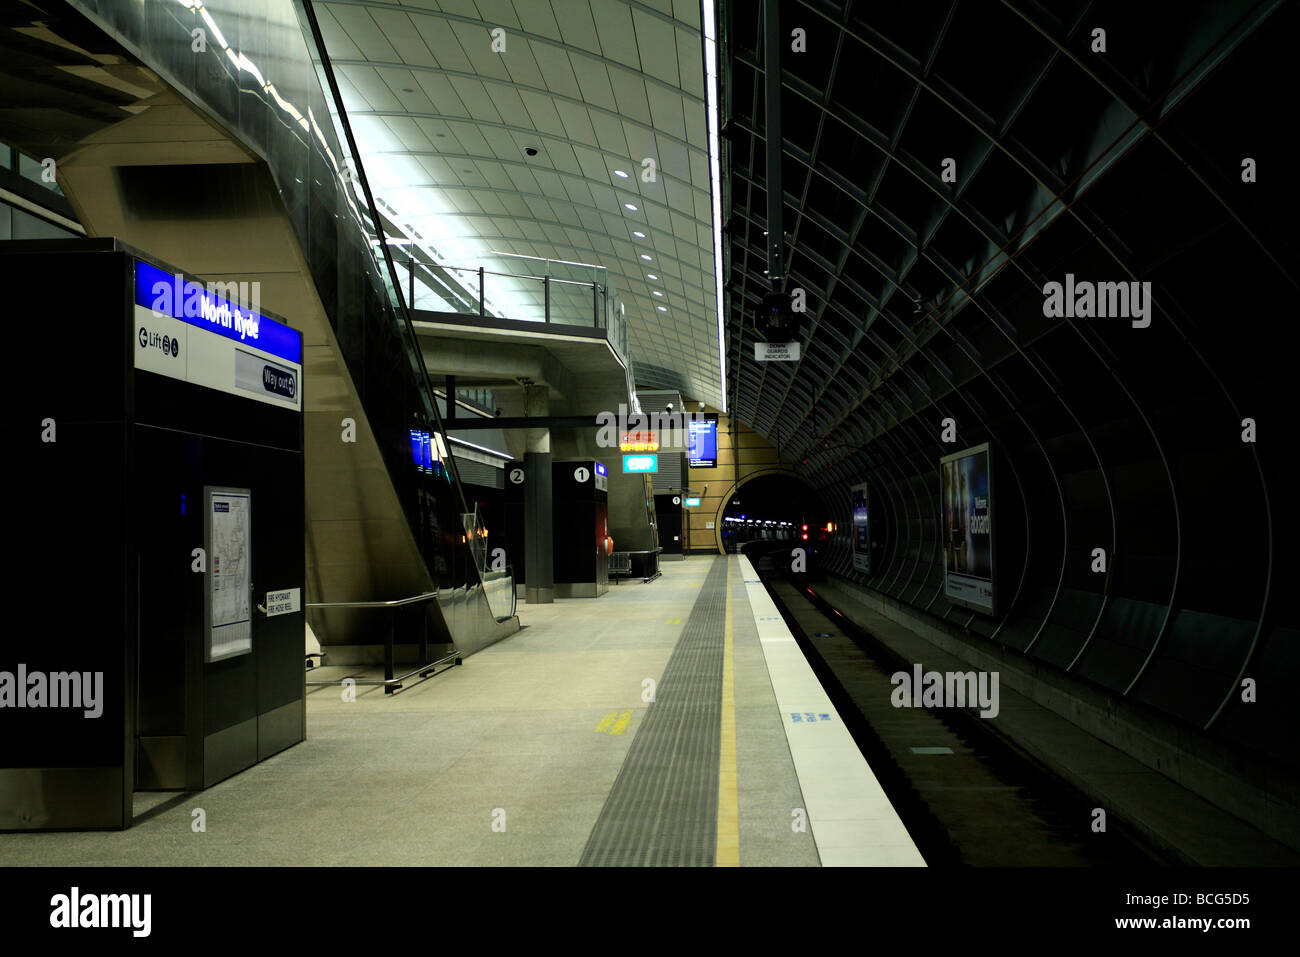 North Ryde Railway Station Sydney Australia. this station is on the Chatswood to Epping line. Stock Photo